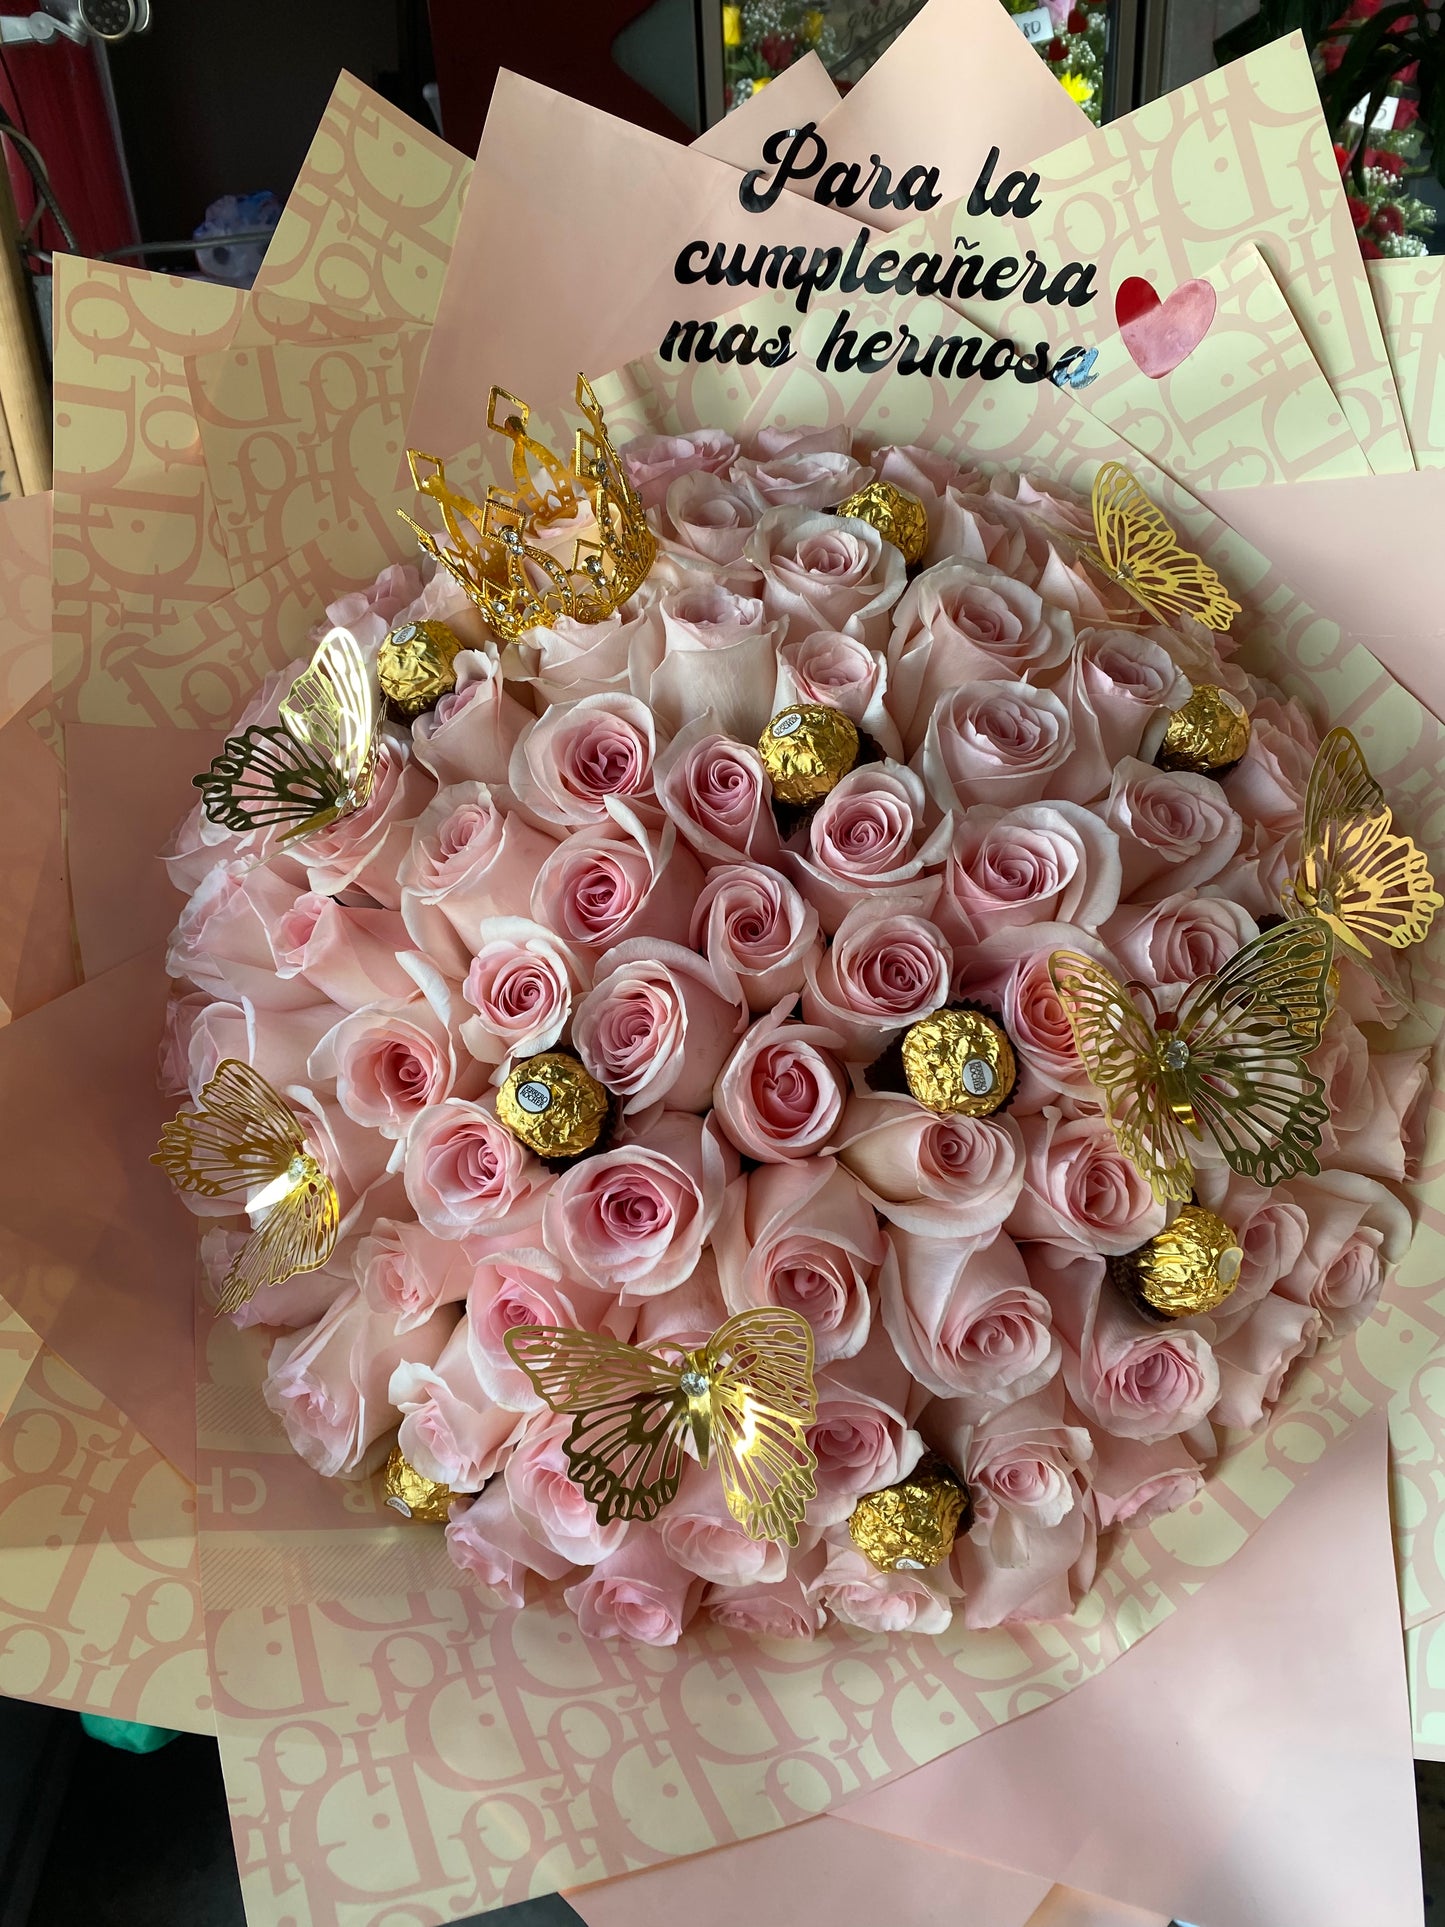 75 Pink Rose Deluxe with chocolate 🍫